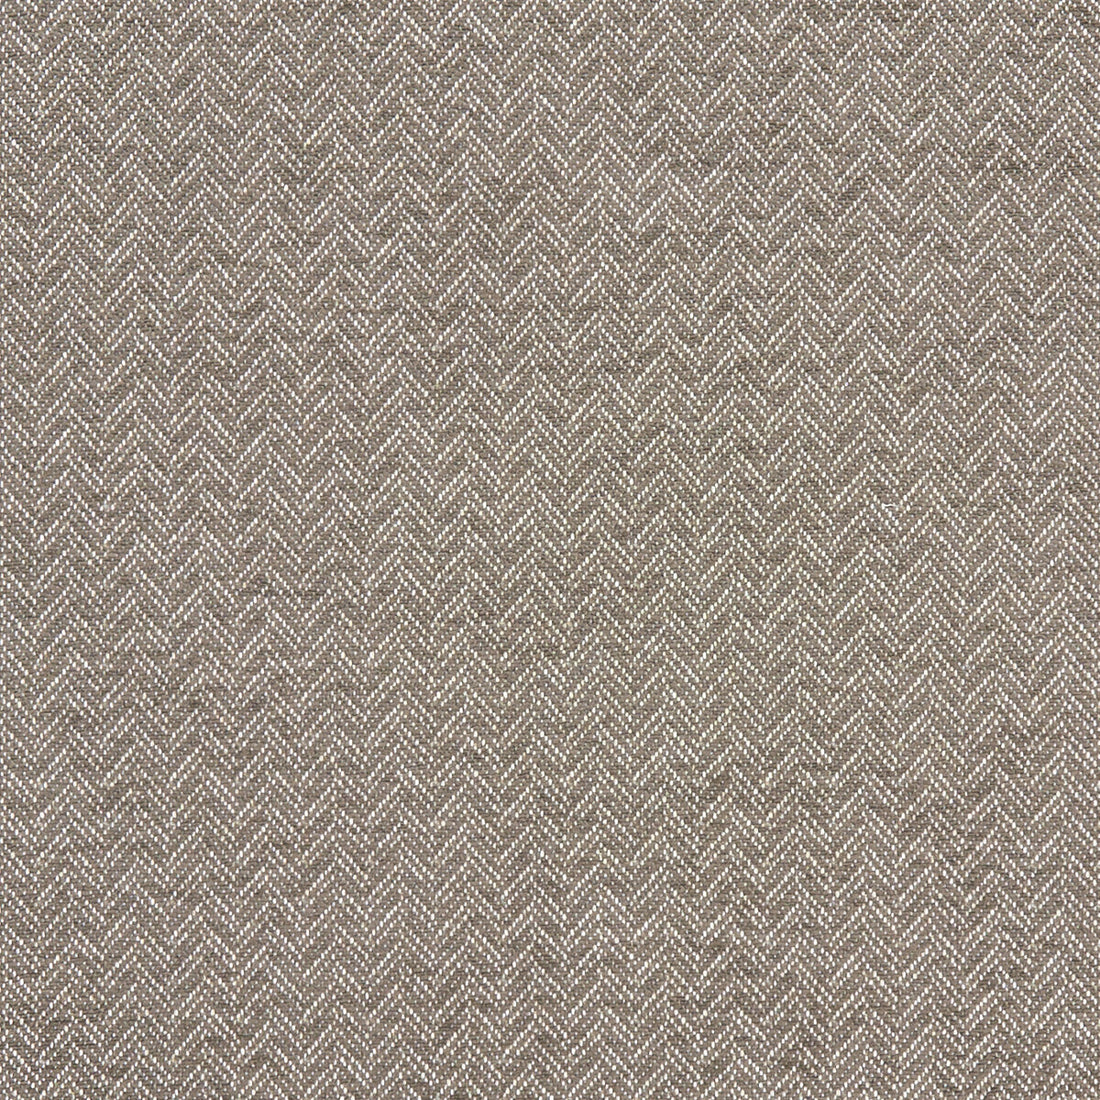 Trinity fabric in mocha color - pattern F1137/07.CAC.0 - by Clarke And Clarke in the Clarke &amp; Clarke Equinox collection